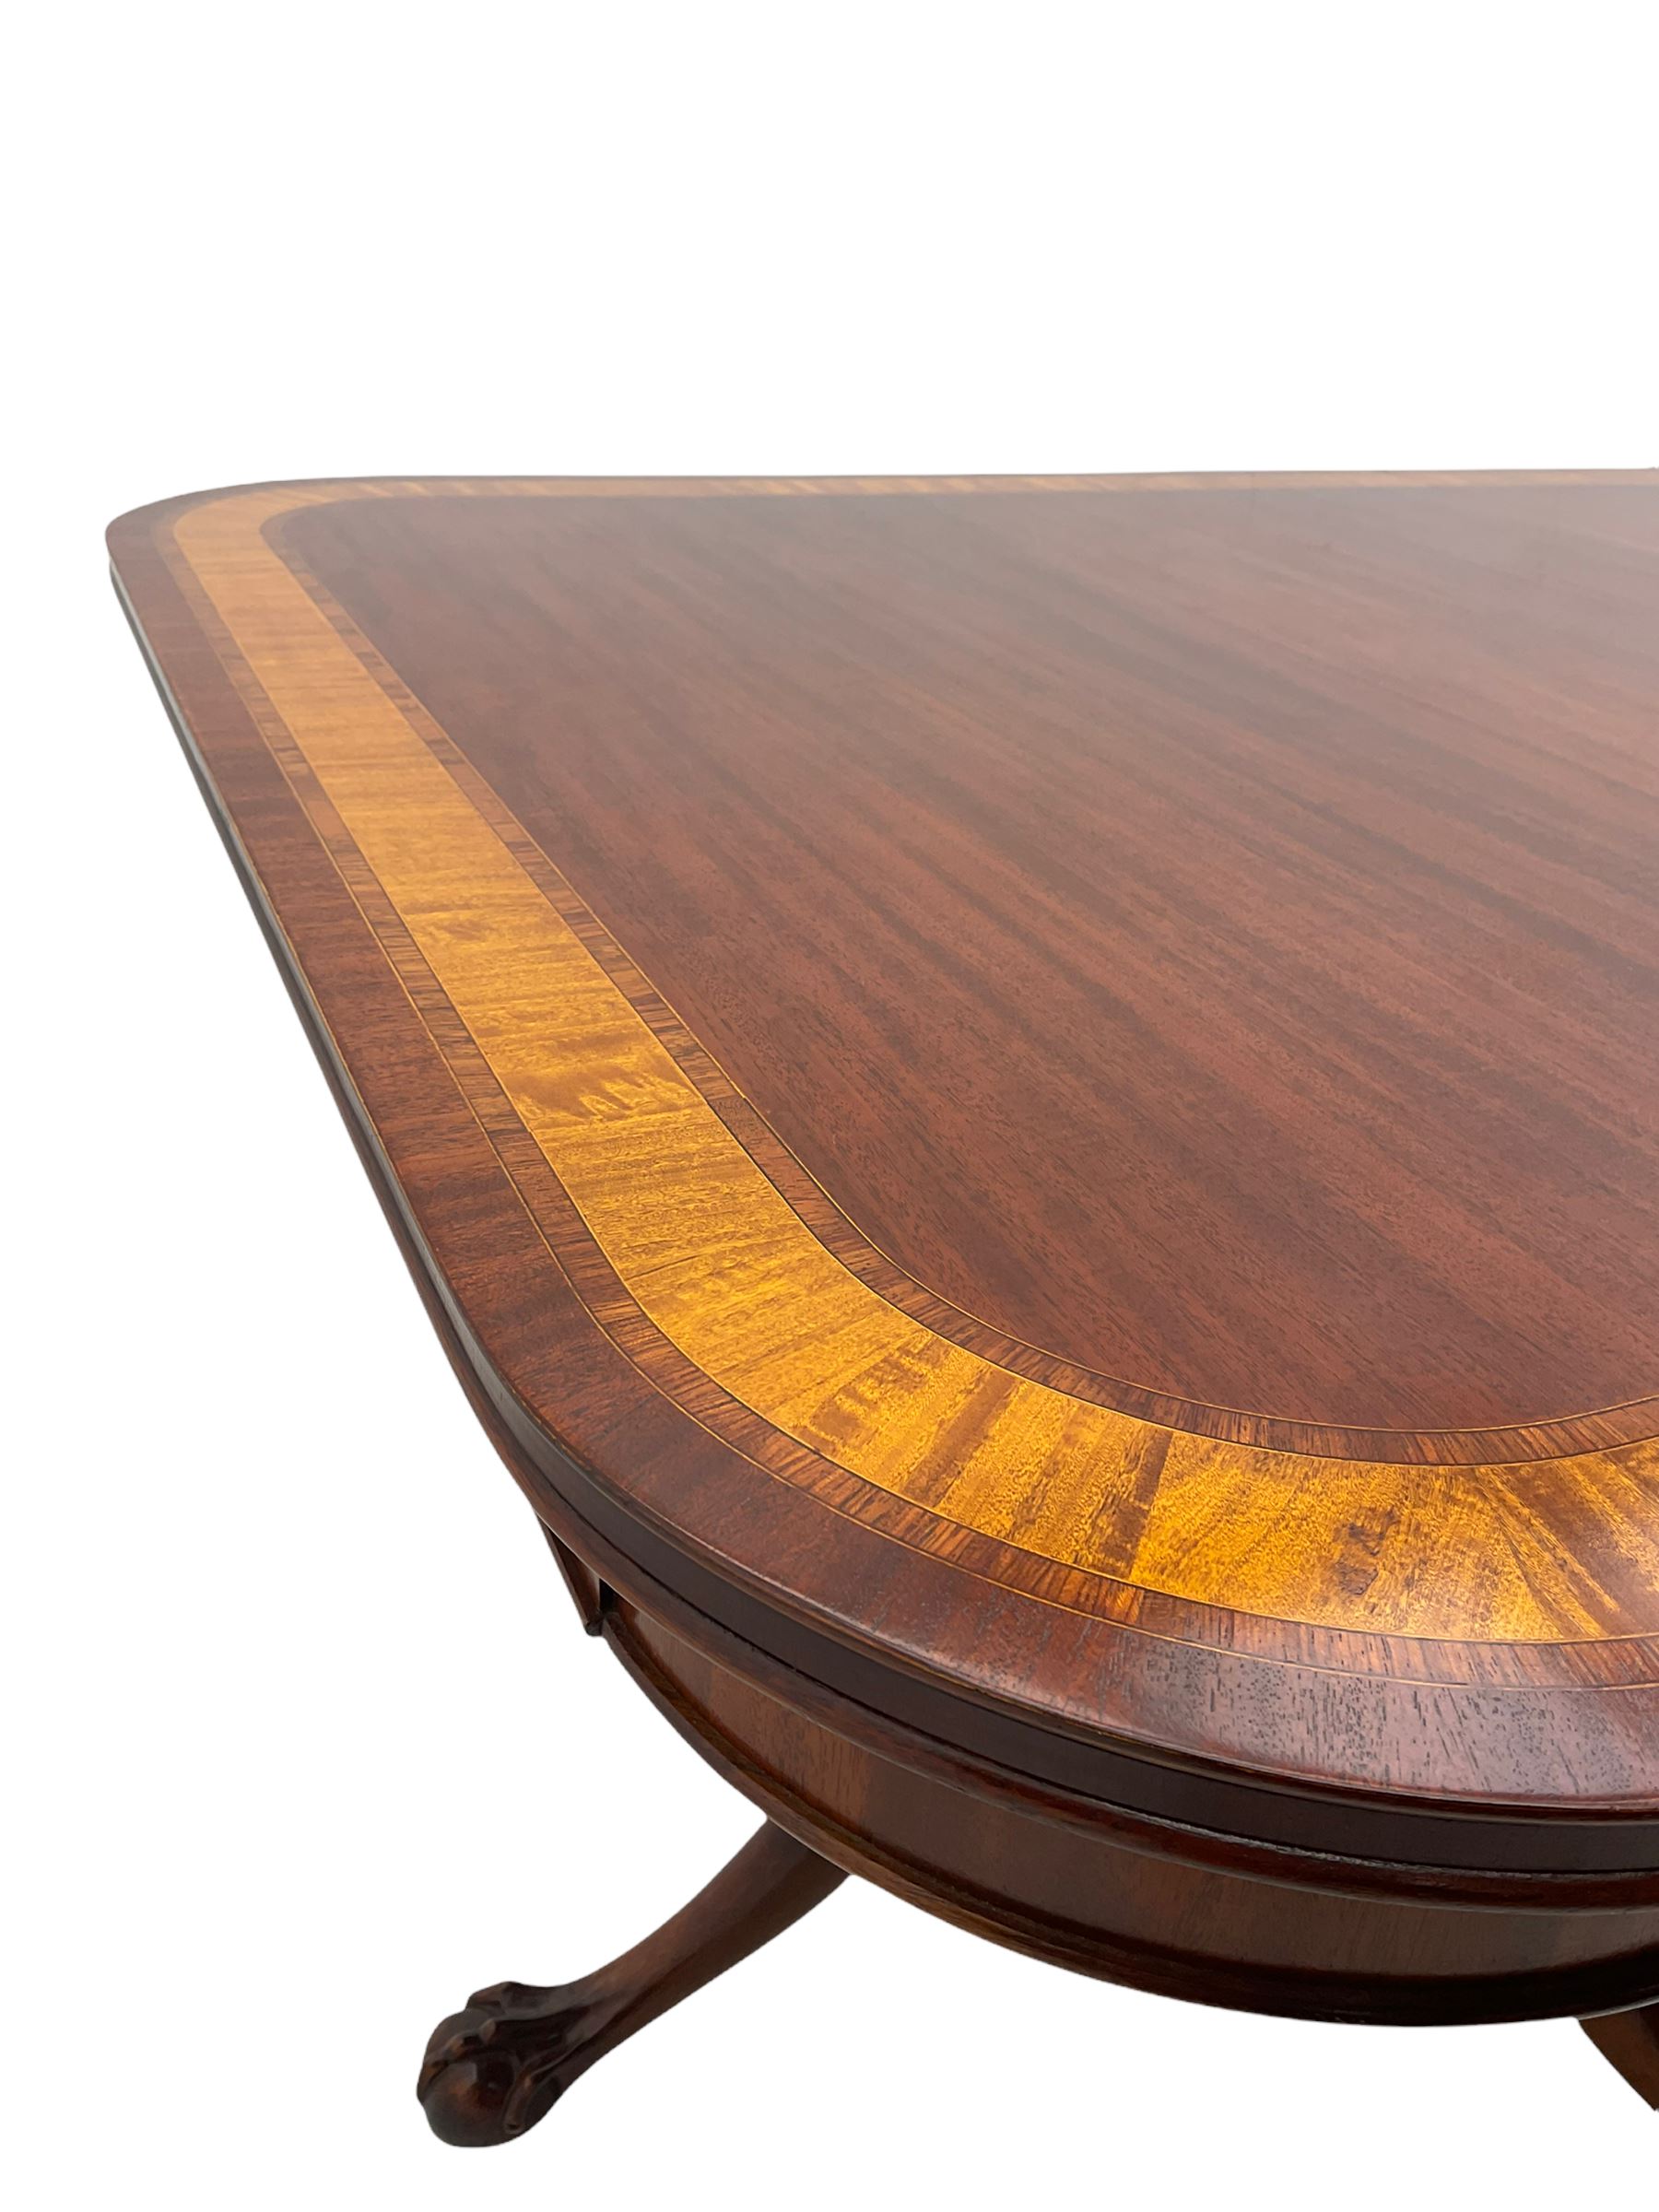 Wade Georgian style mahogany extending dining table with leaf - Image 4 of 27